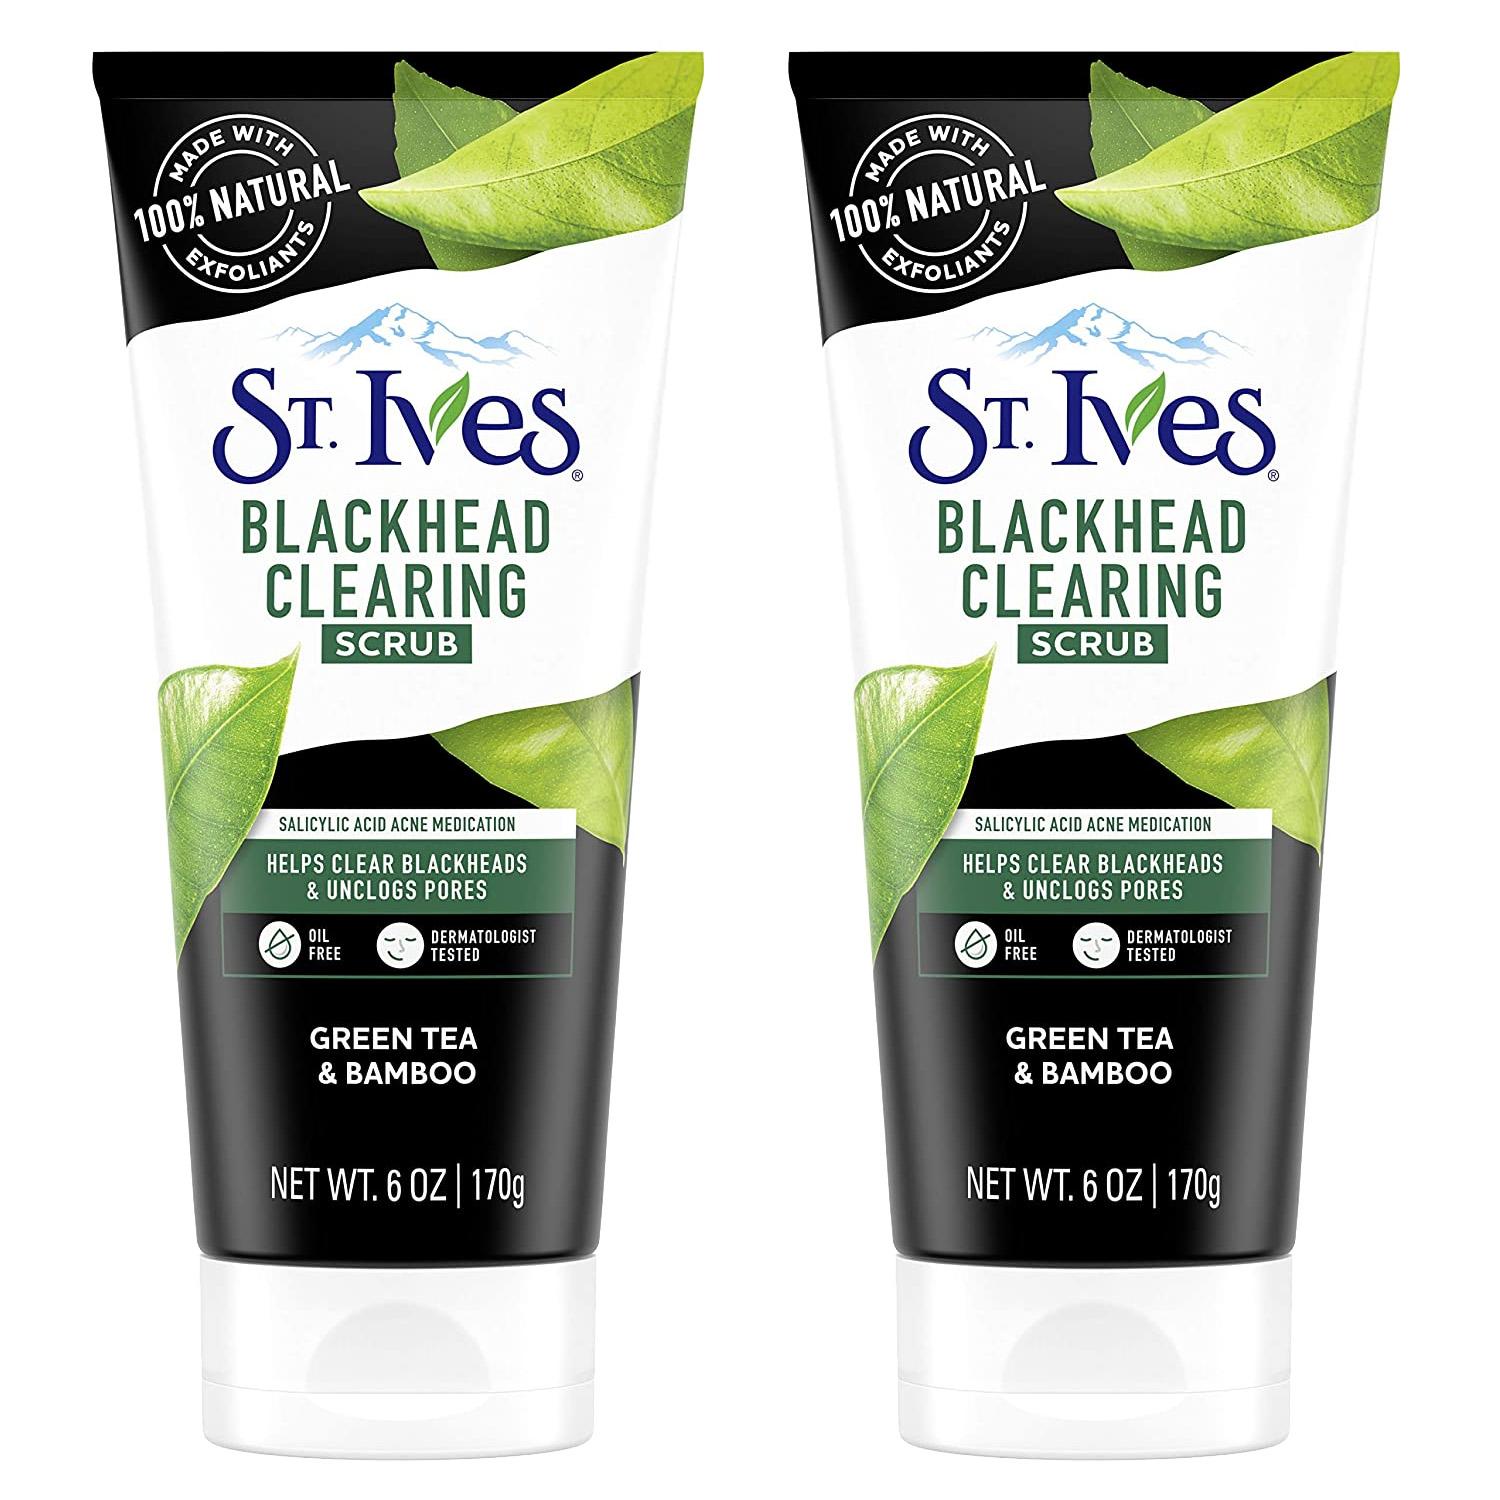 St Ives Blackhead Clearing Face Scrub 2 Pack for $5.58 Shipped